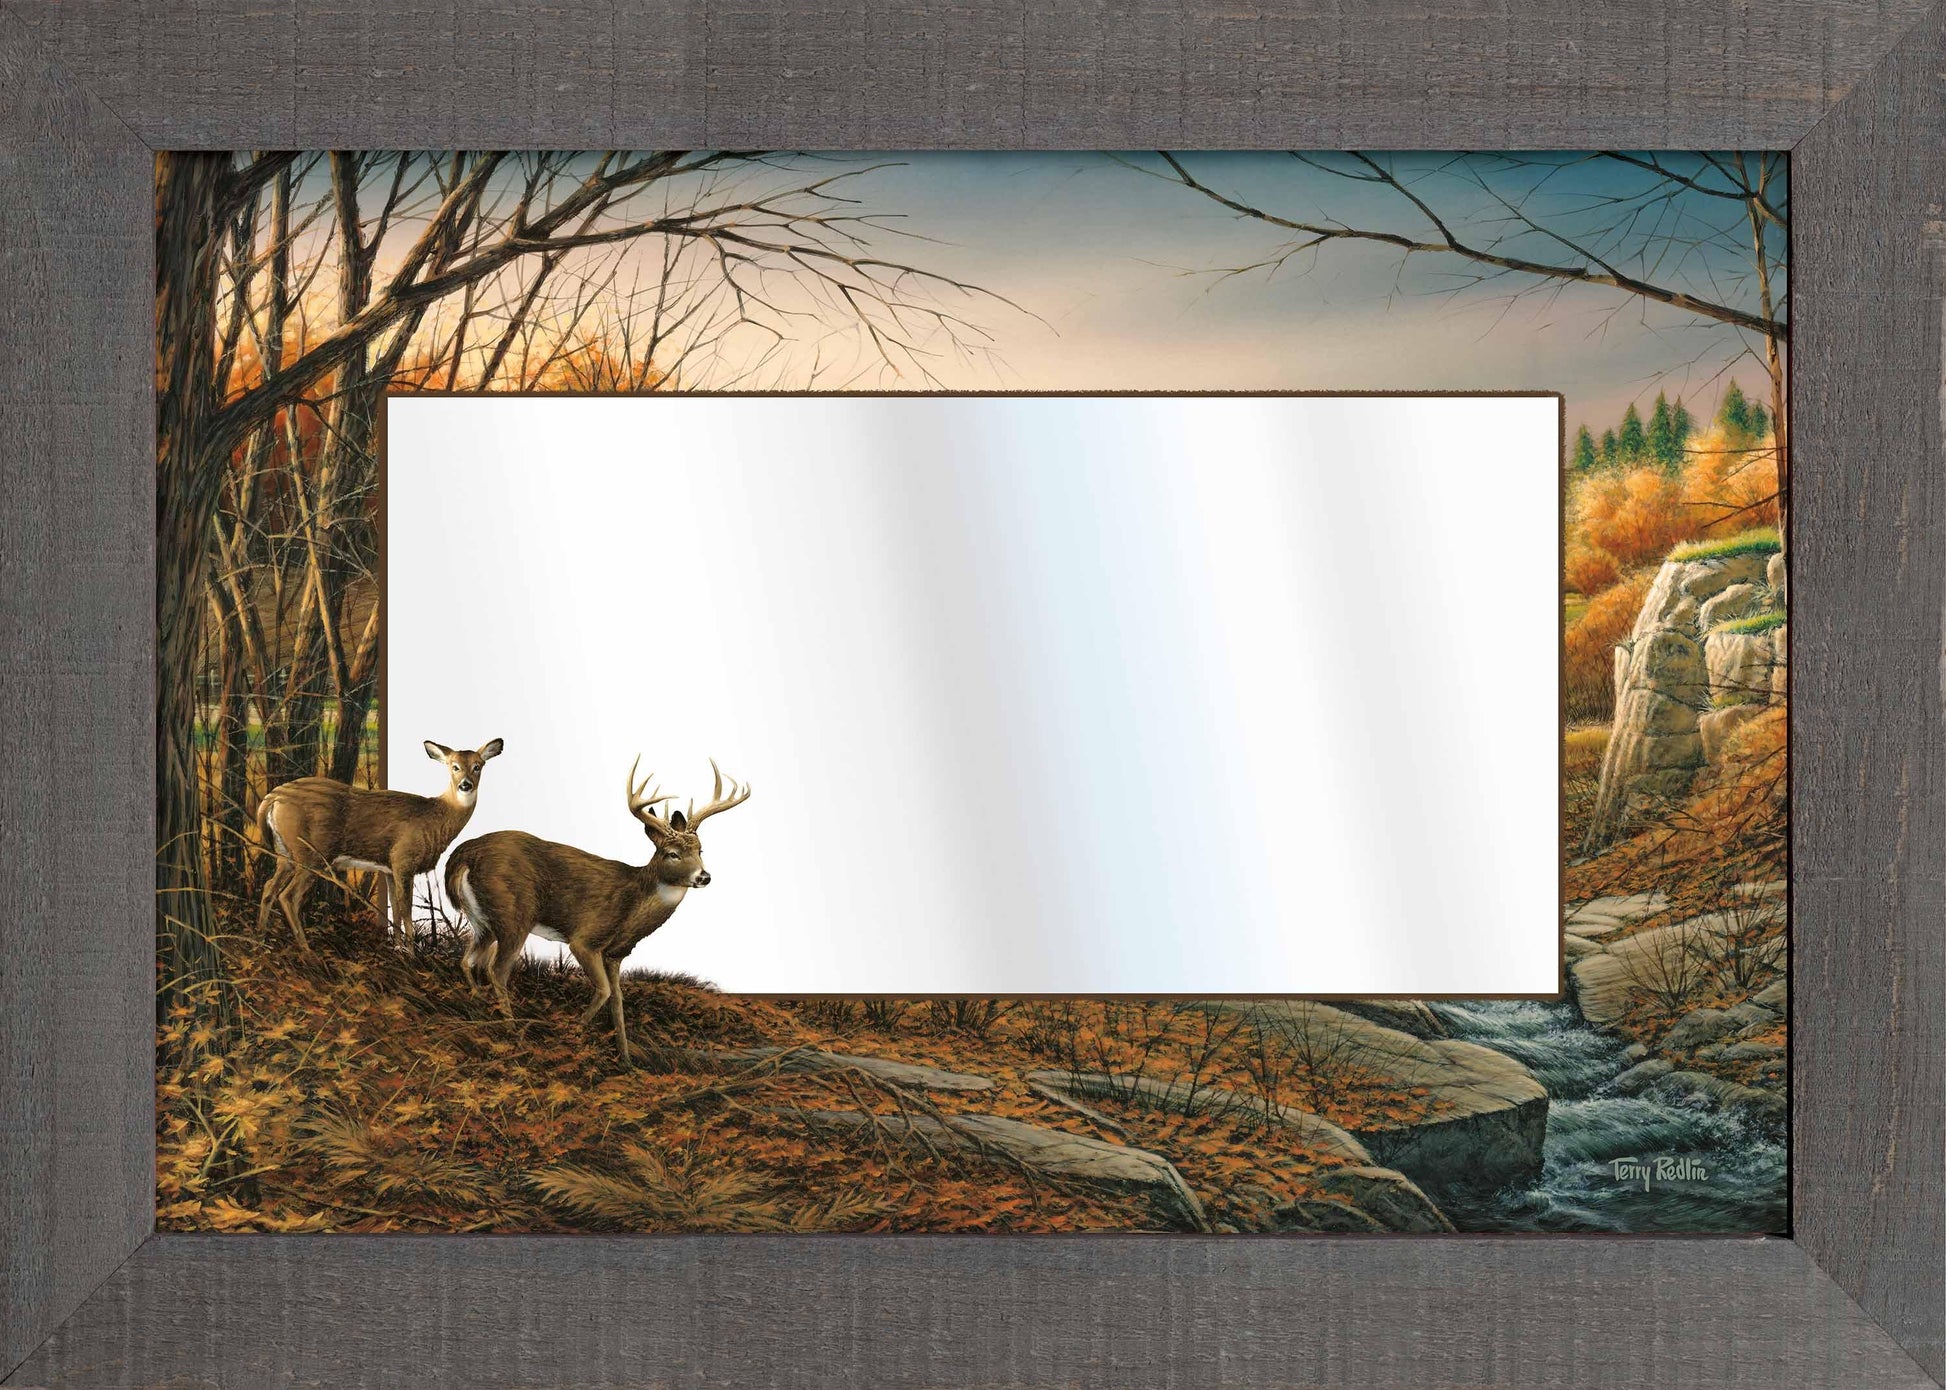 Indian Summer Large Decorative Mirror - Wild Wings